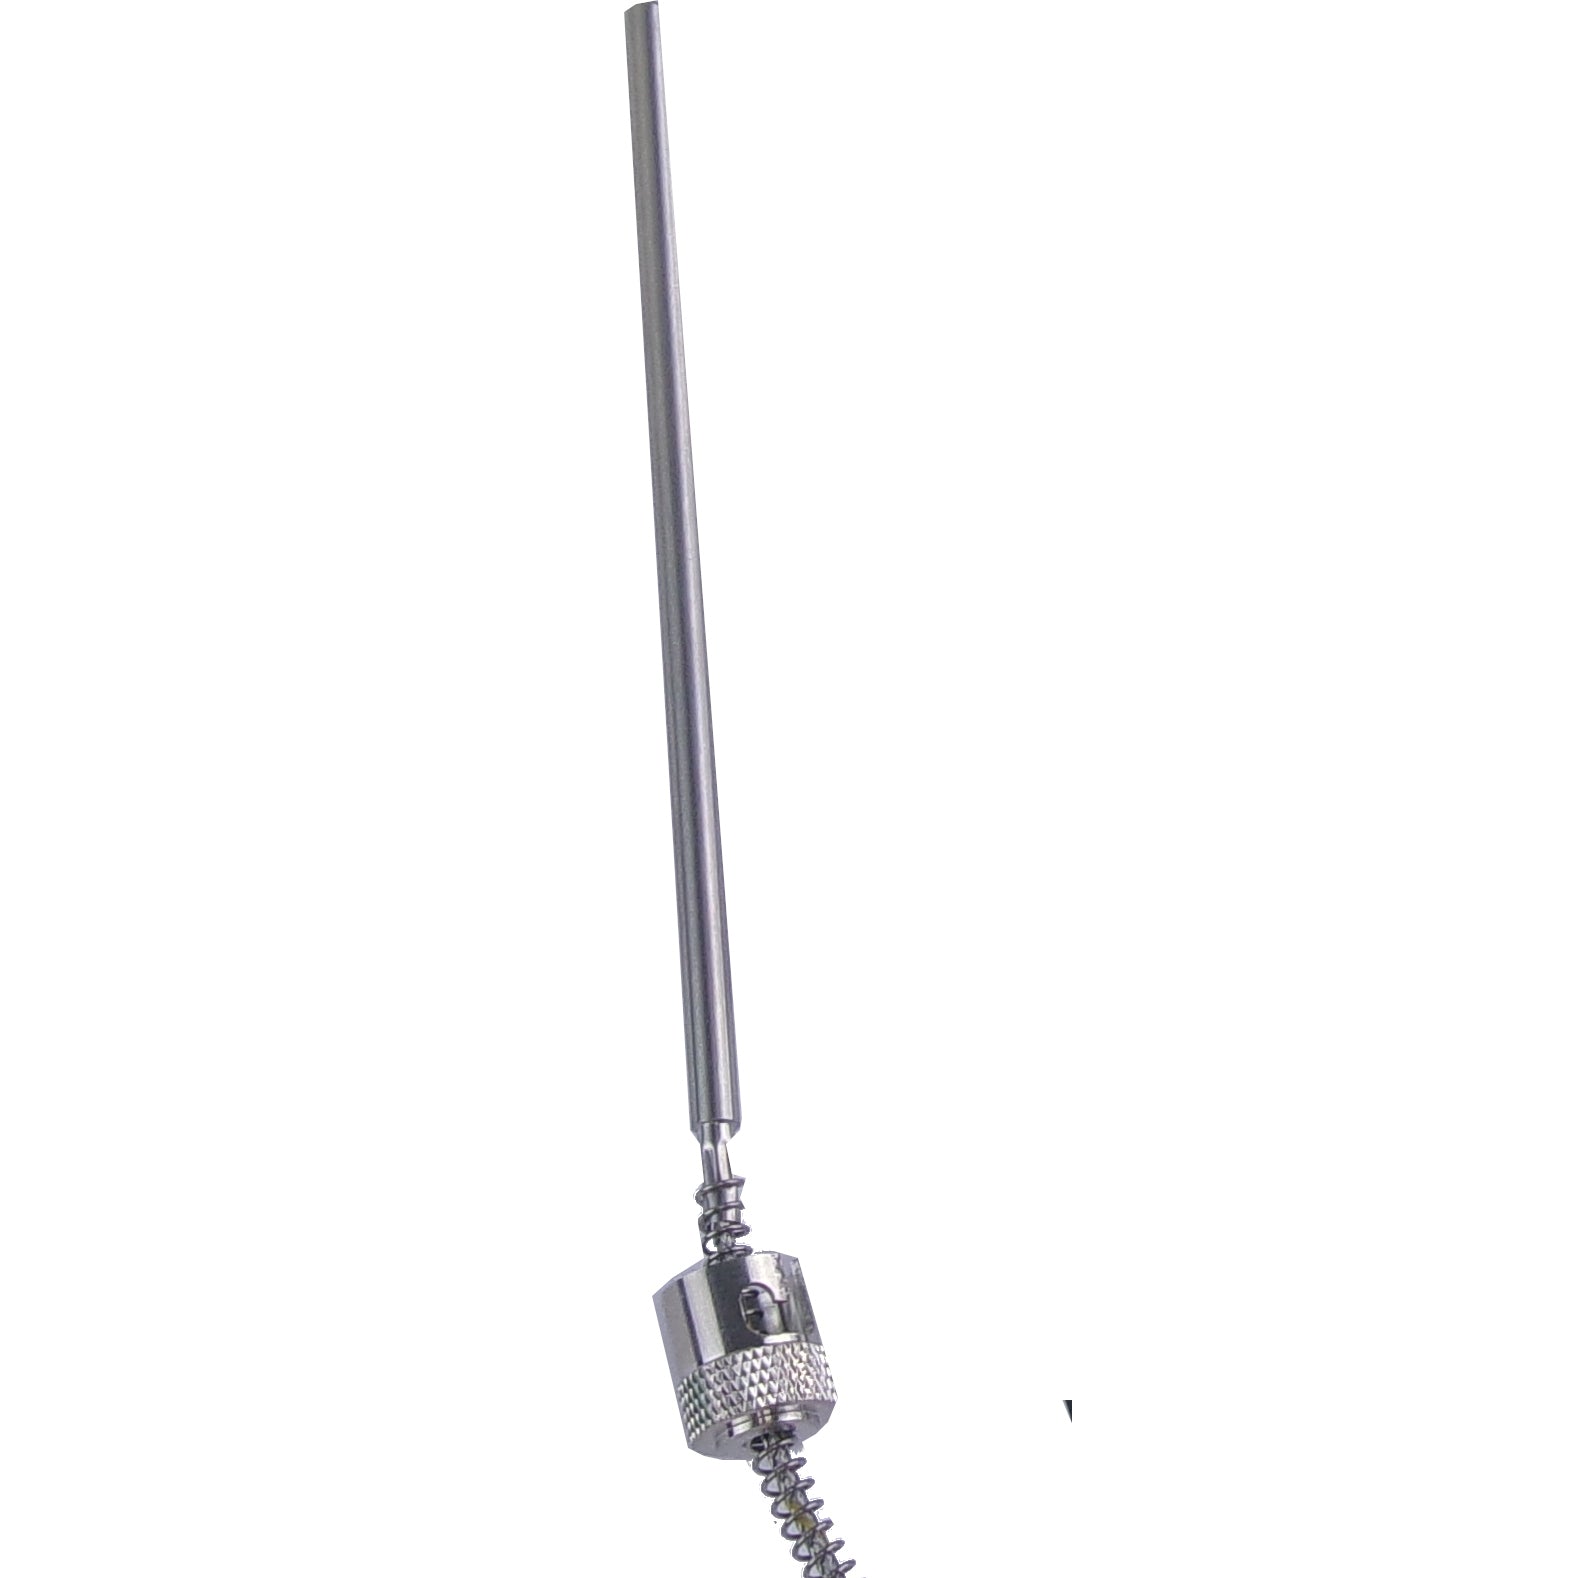 FTCK-5-120-PLAS-3000, Type K Class A Thermocouple, -20 to 480 Deg C Plastic Industry Style x 4.8mm Probe w/ 3000mm Screened Teflon/Braided SS cable, CE ANSI ROHS Approved